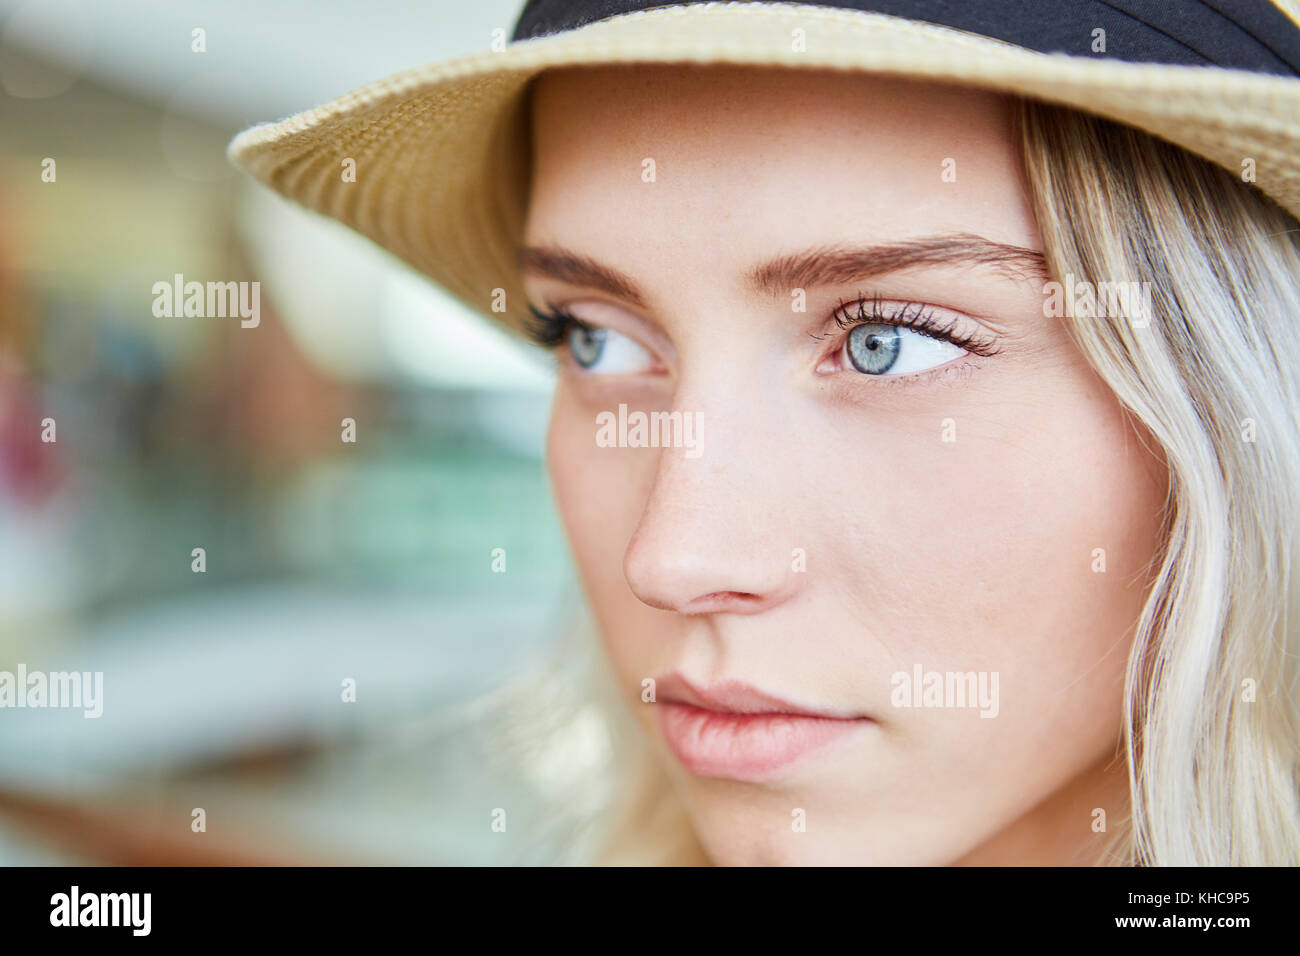 Young blond woman with straw hat looks melancholy Stock Photo